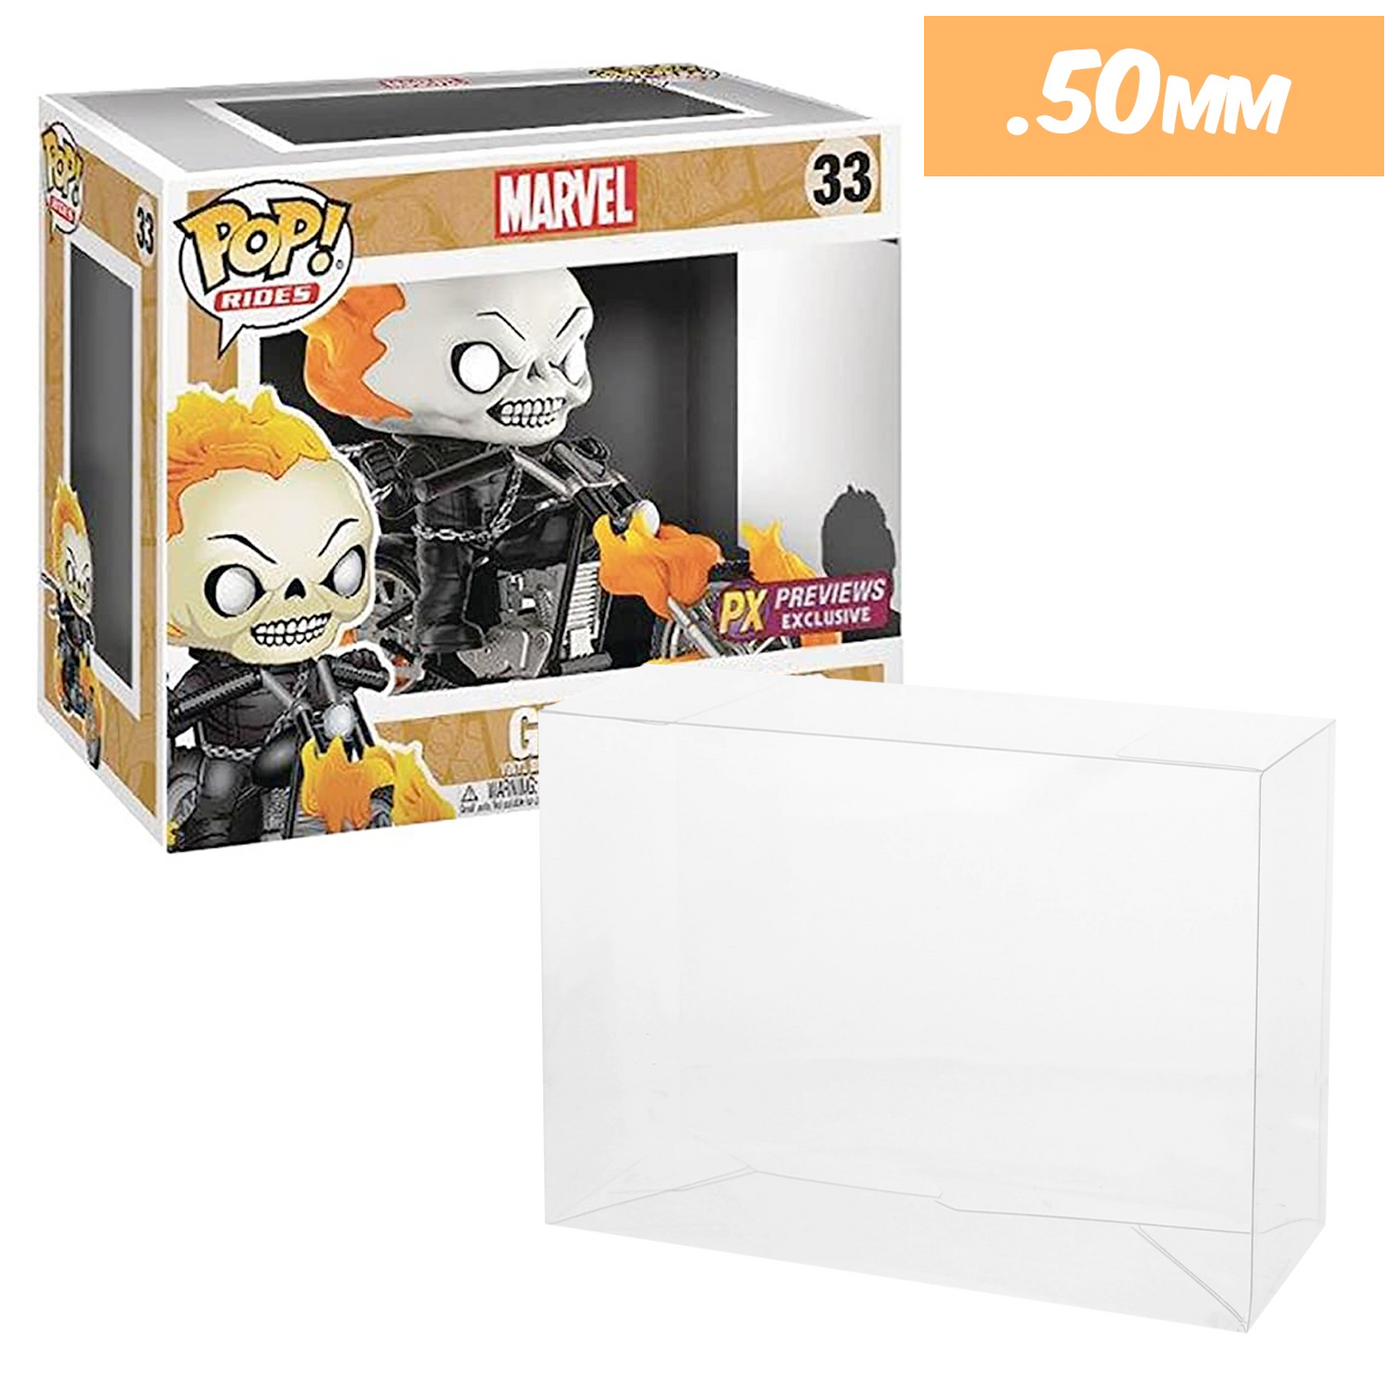 px previews ghost rider bike motorcycle pop rides best funko pop protectors thick strong uv scratch flat top stack vinyl display geek plastic shield vaulted eco armor fits collect protect display case kollector protector